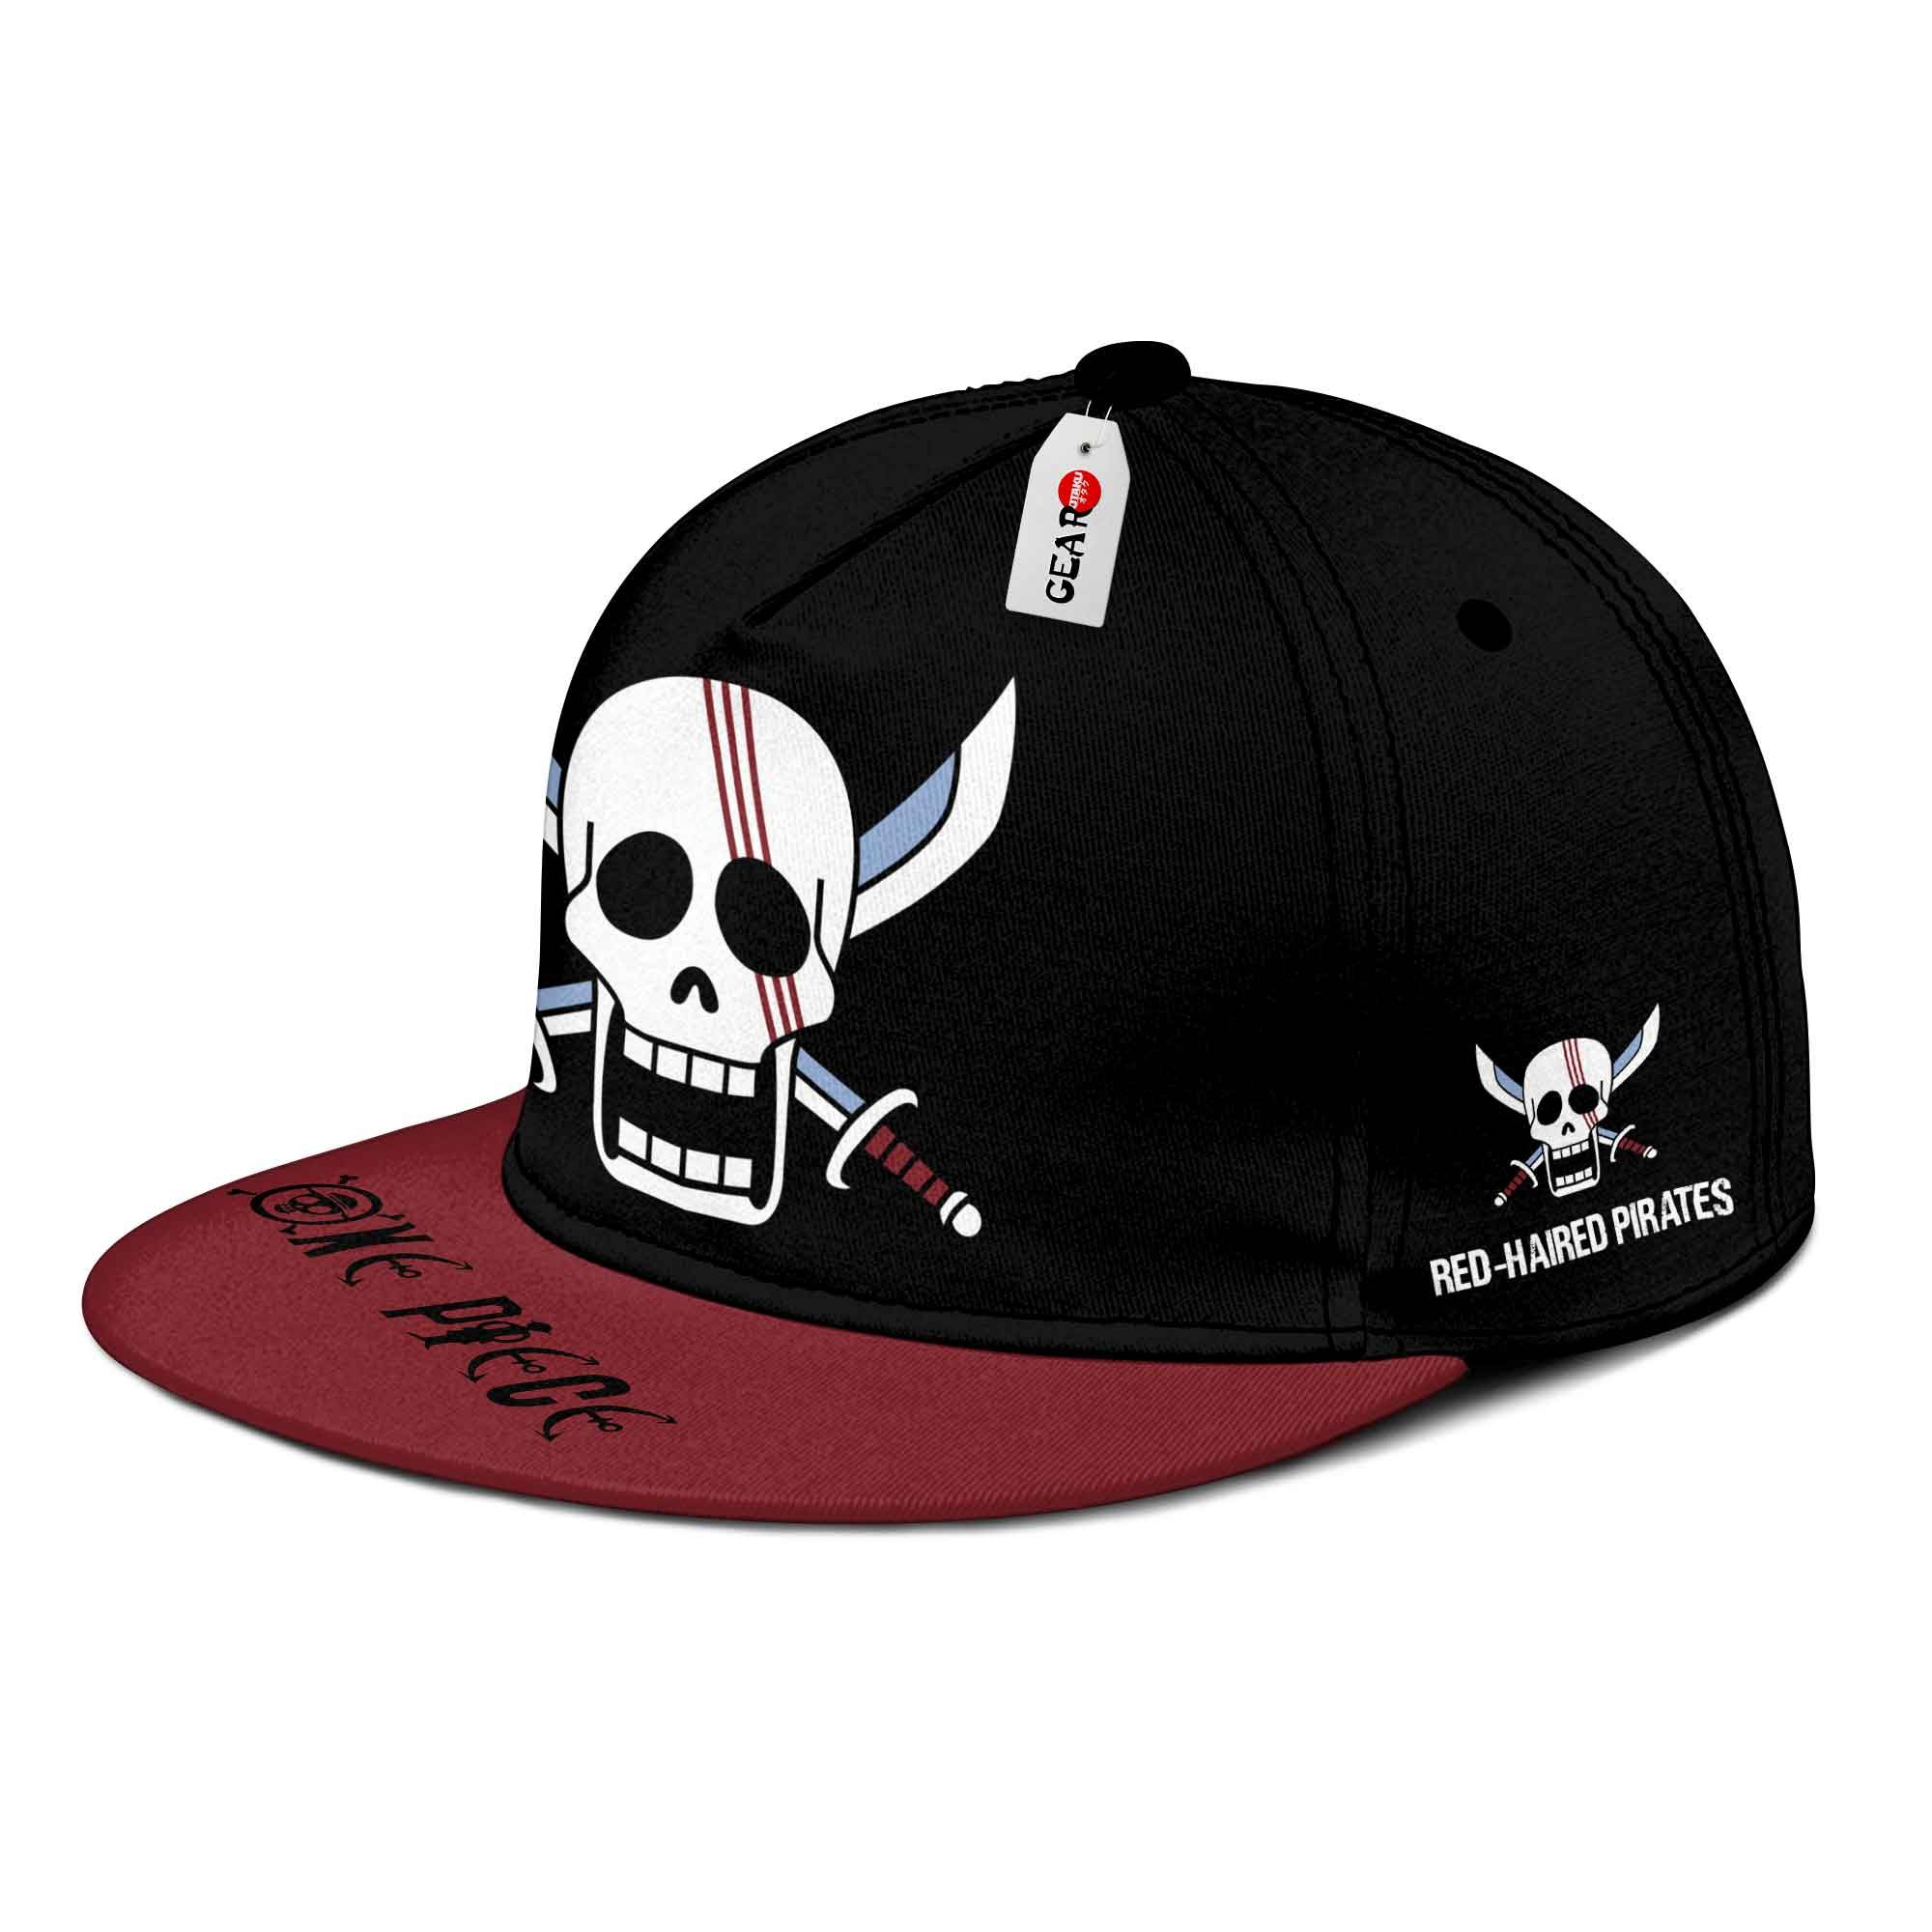 NEW Red Hair Pirates One Piece Cap hat2